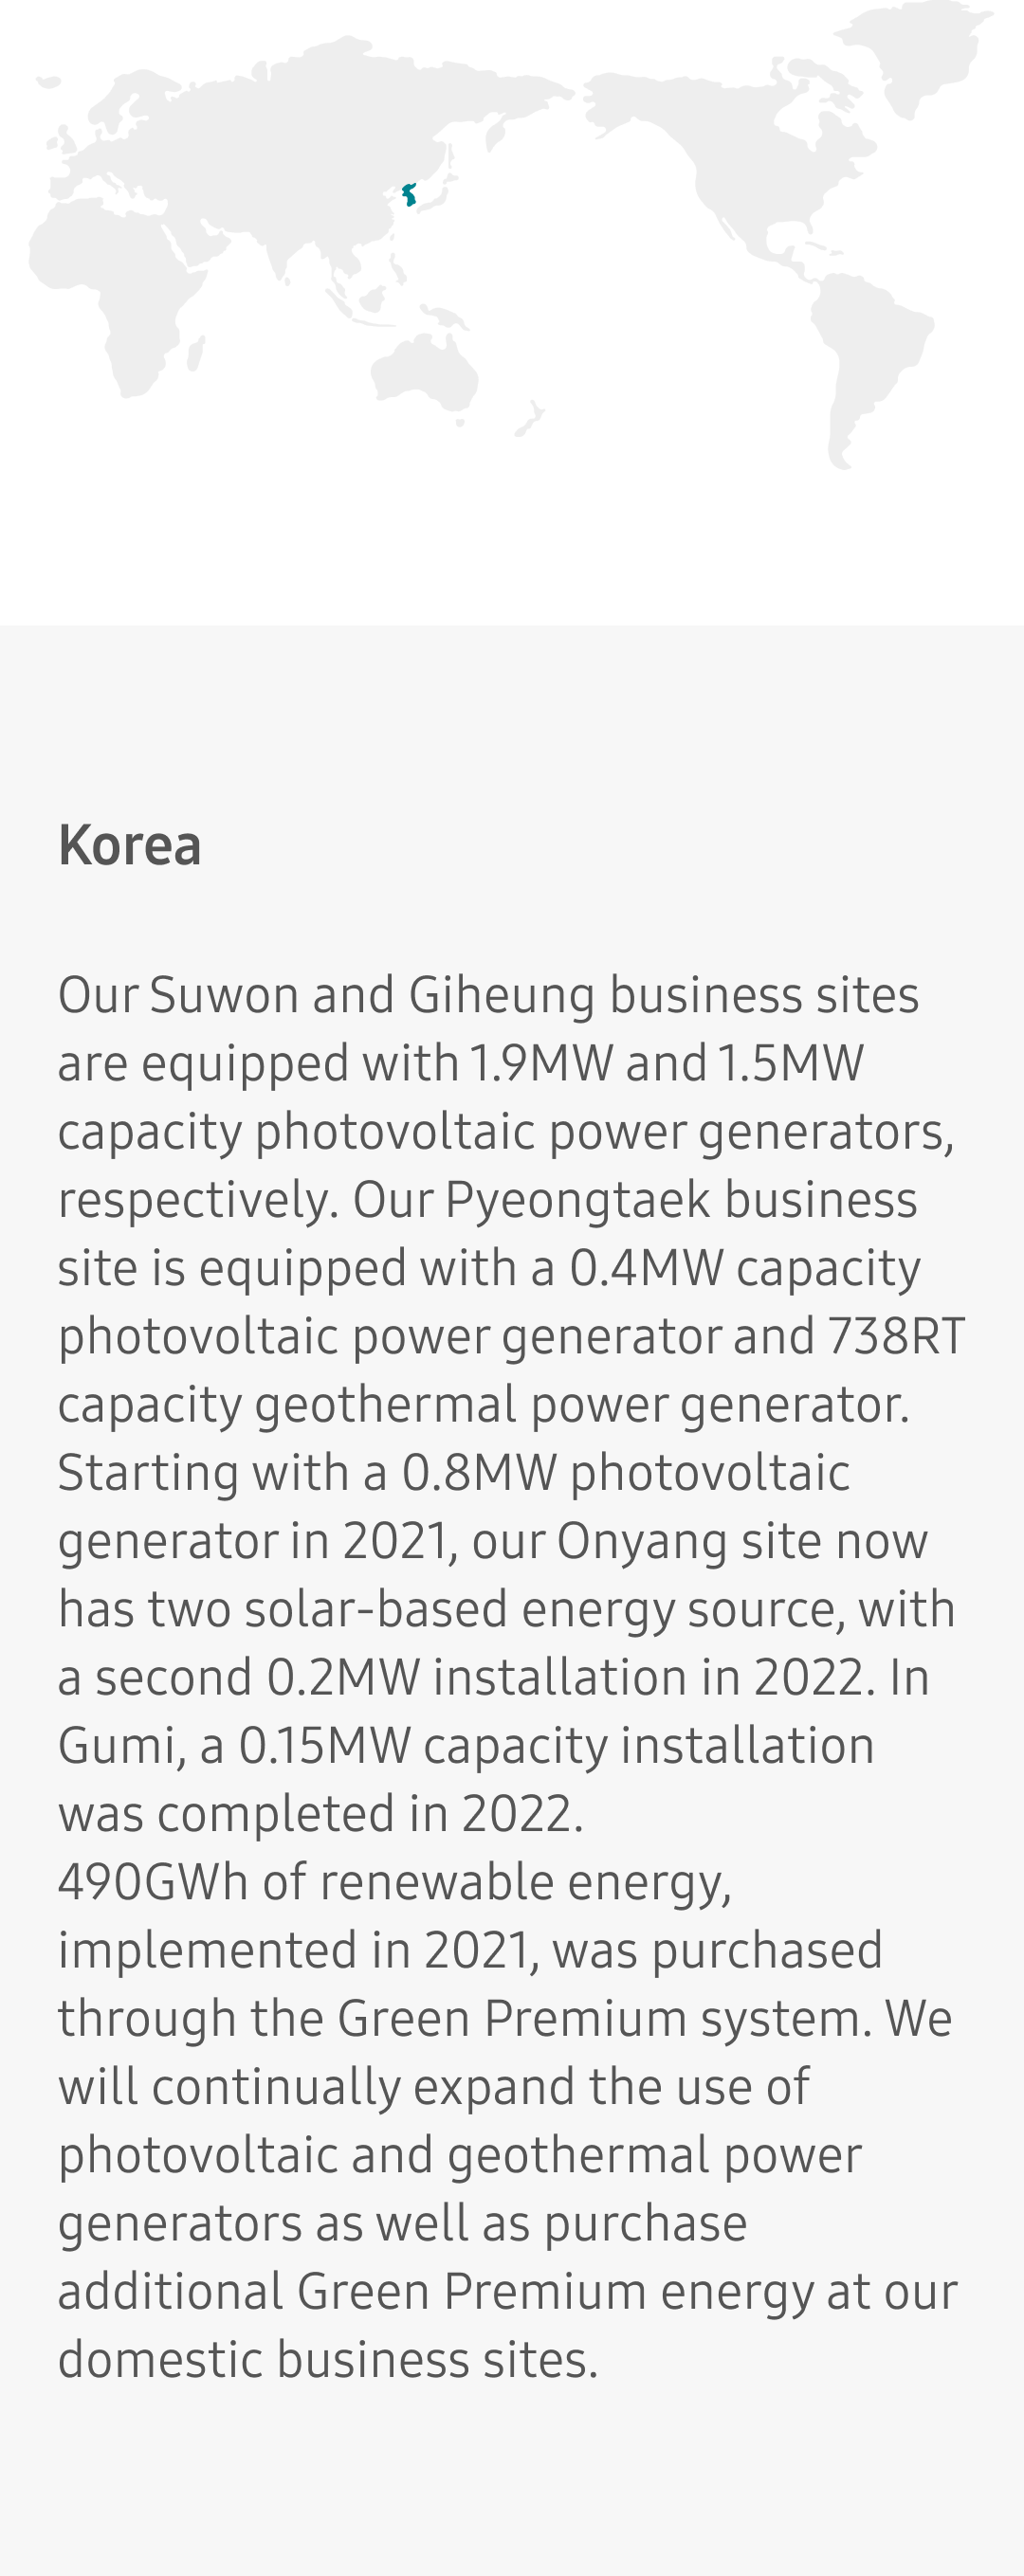 Our Suwon and Giheung business sites are equipped with 1.9MW and 1.5MW capacity photovoltaic power generators, respectively. Our Pyeongtaek business site is equipped with a 0.4MW capacity photovoltaic power generator and 200RT capacity geothermal power generator.
										Starting with a 0.8MW photovoltaic generator in 2021, our Onyang site now has two solar-based energy source, with a second 0.2MW installation in 2022. In Gumi, a 0.15MW capacity installation was completed in 2022.
										490GWh of renewable energy, implemented in 2021, was purchased through the Green Premium system. We will continually expand the use of photovoltaic and geothermal power generators as well as purchase additional Green Premium energy at our domestic business sites.